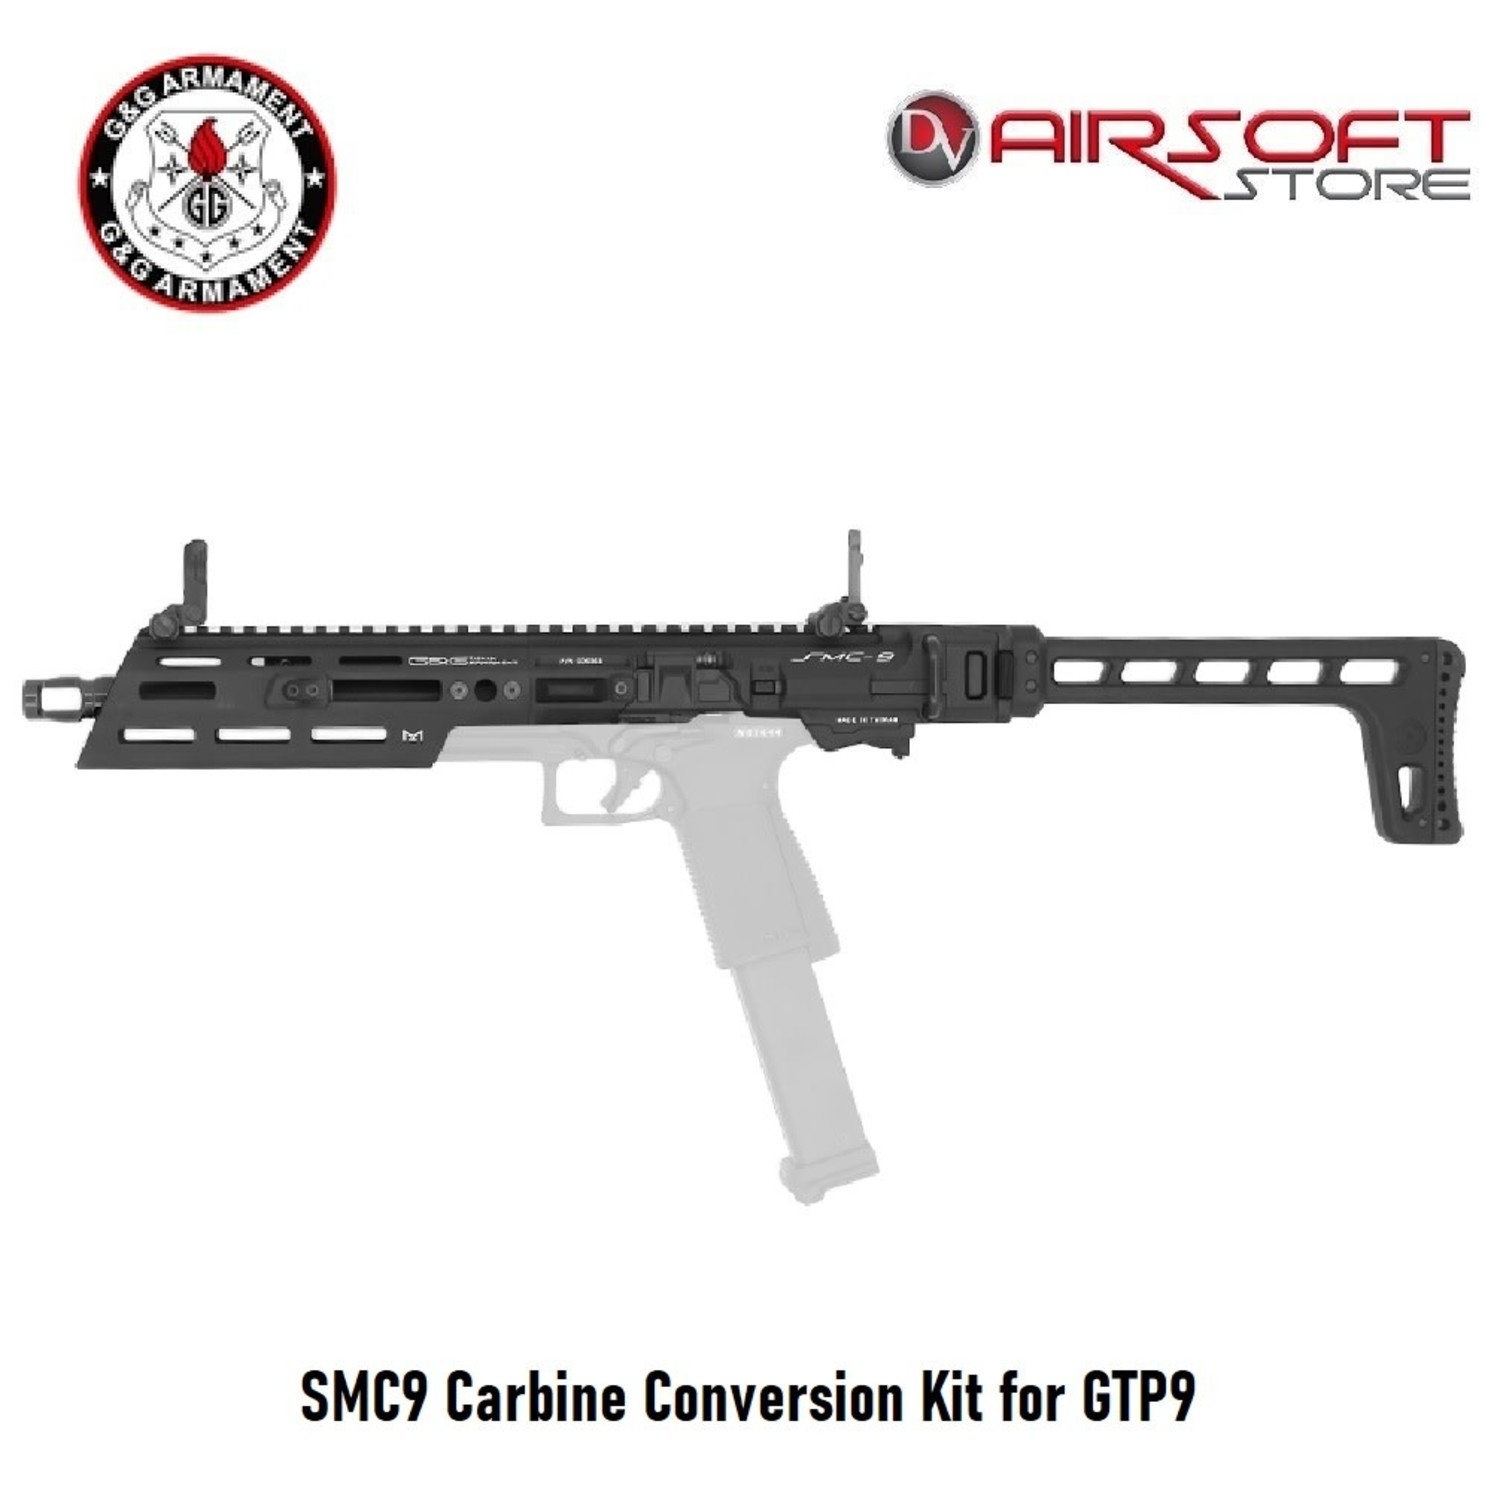 SMC9 Carbine Conversion Kit for GTP9 - Airsoft Store